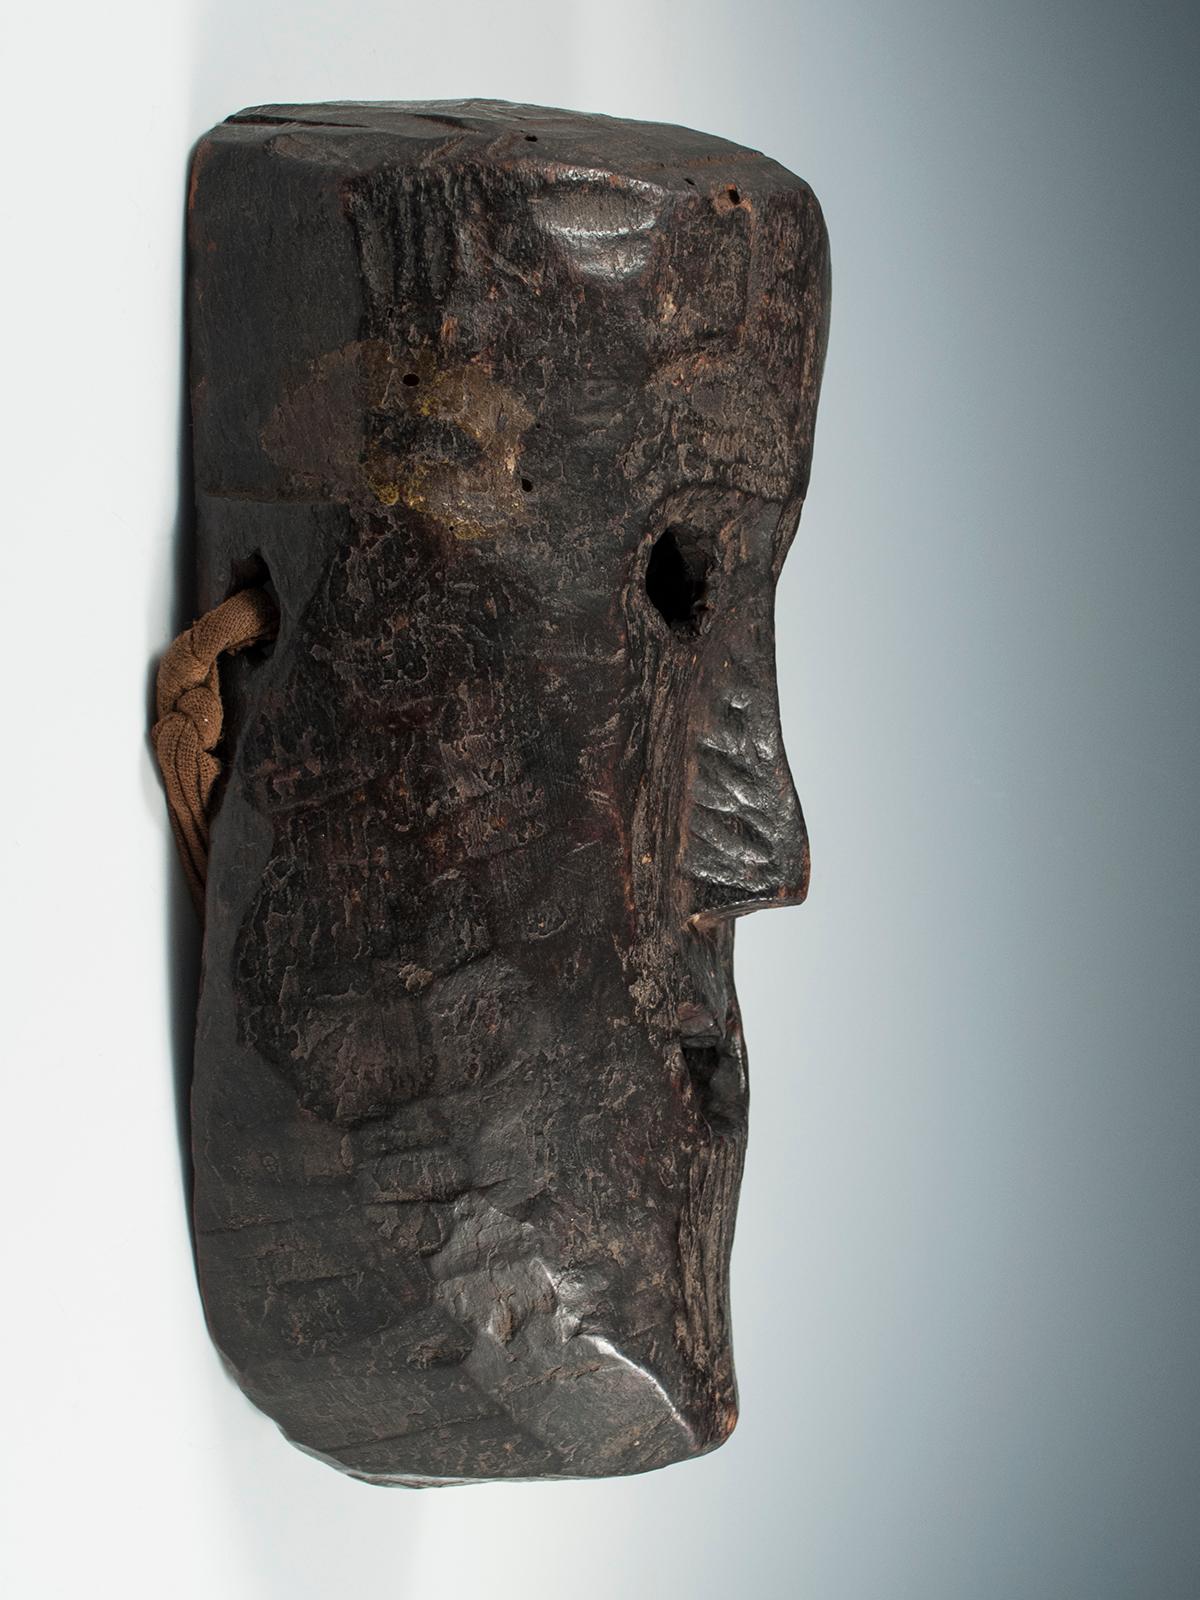 Late 19th-early 20th century Tribal mask, Middle Hills, Nepal

With a somewhat unconvincing smile, the expression on this mask is ambiguous yet powerful. It is large mask, with a prominent forehead and wonderful patina. There is a greenish-yellow